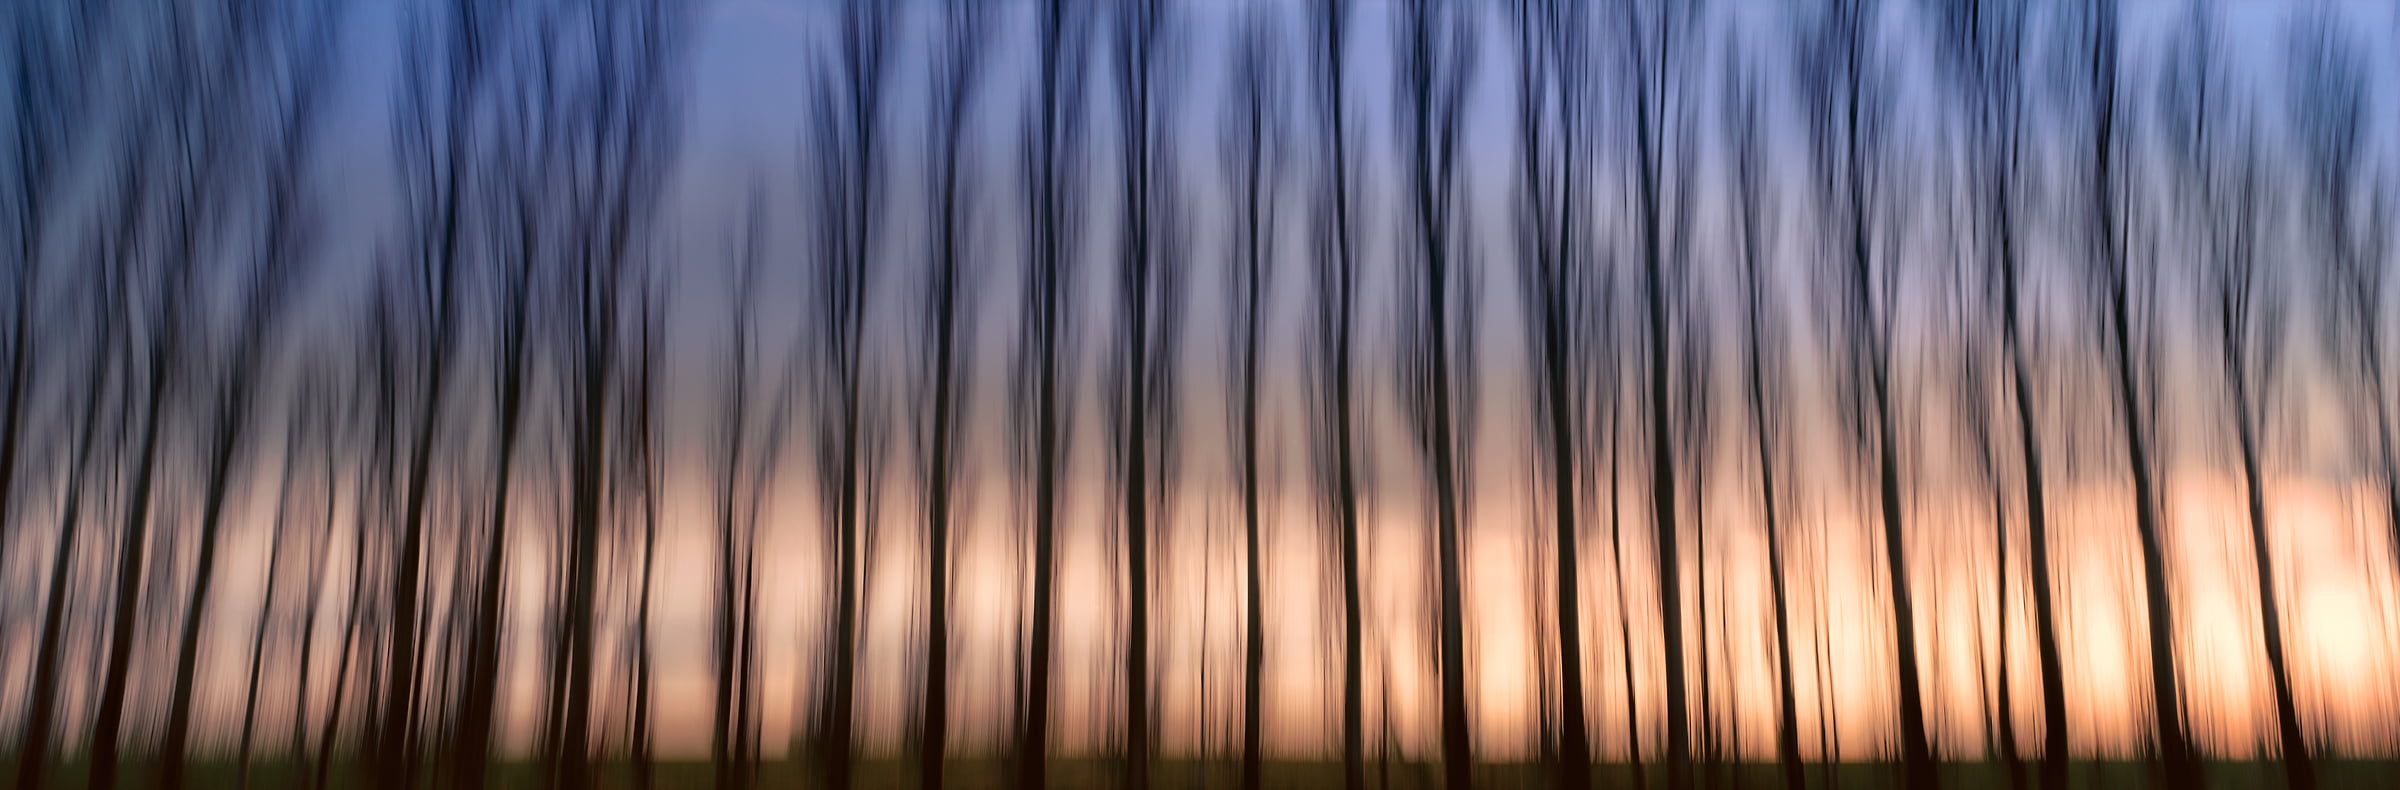 326 megapixels! A very high resolution, large-format, abstract photograph of trees; fine art photograph created by Scott Dimond in Wheatland County, Alberta, Canada.